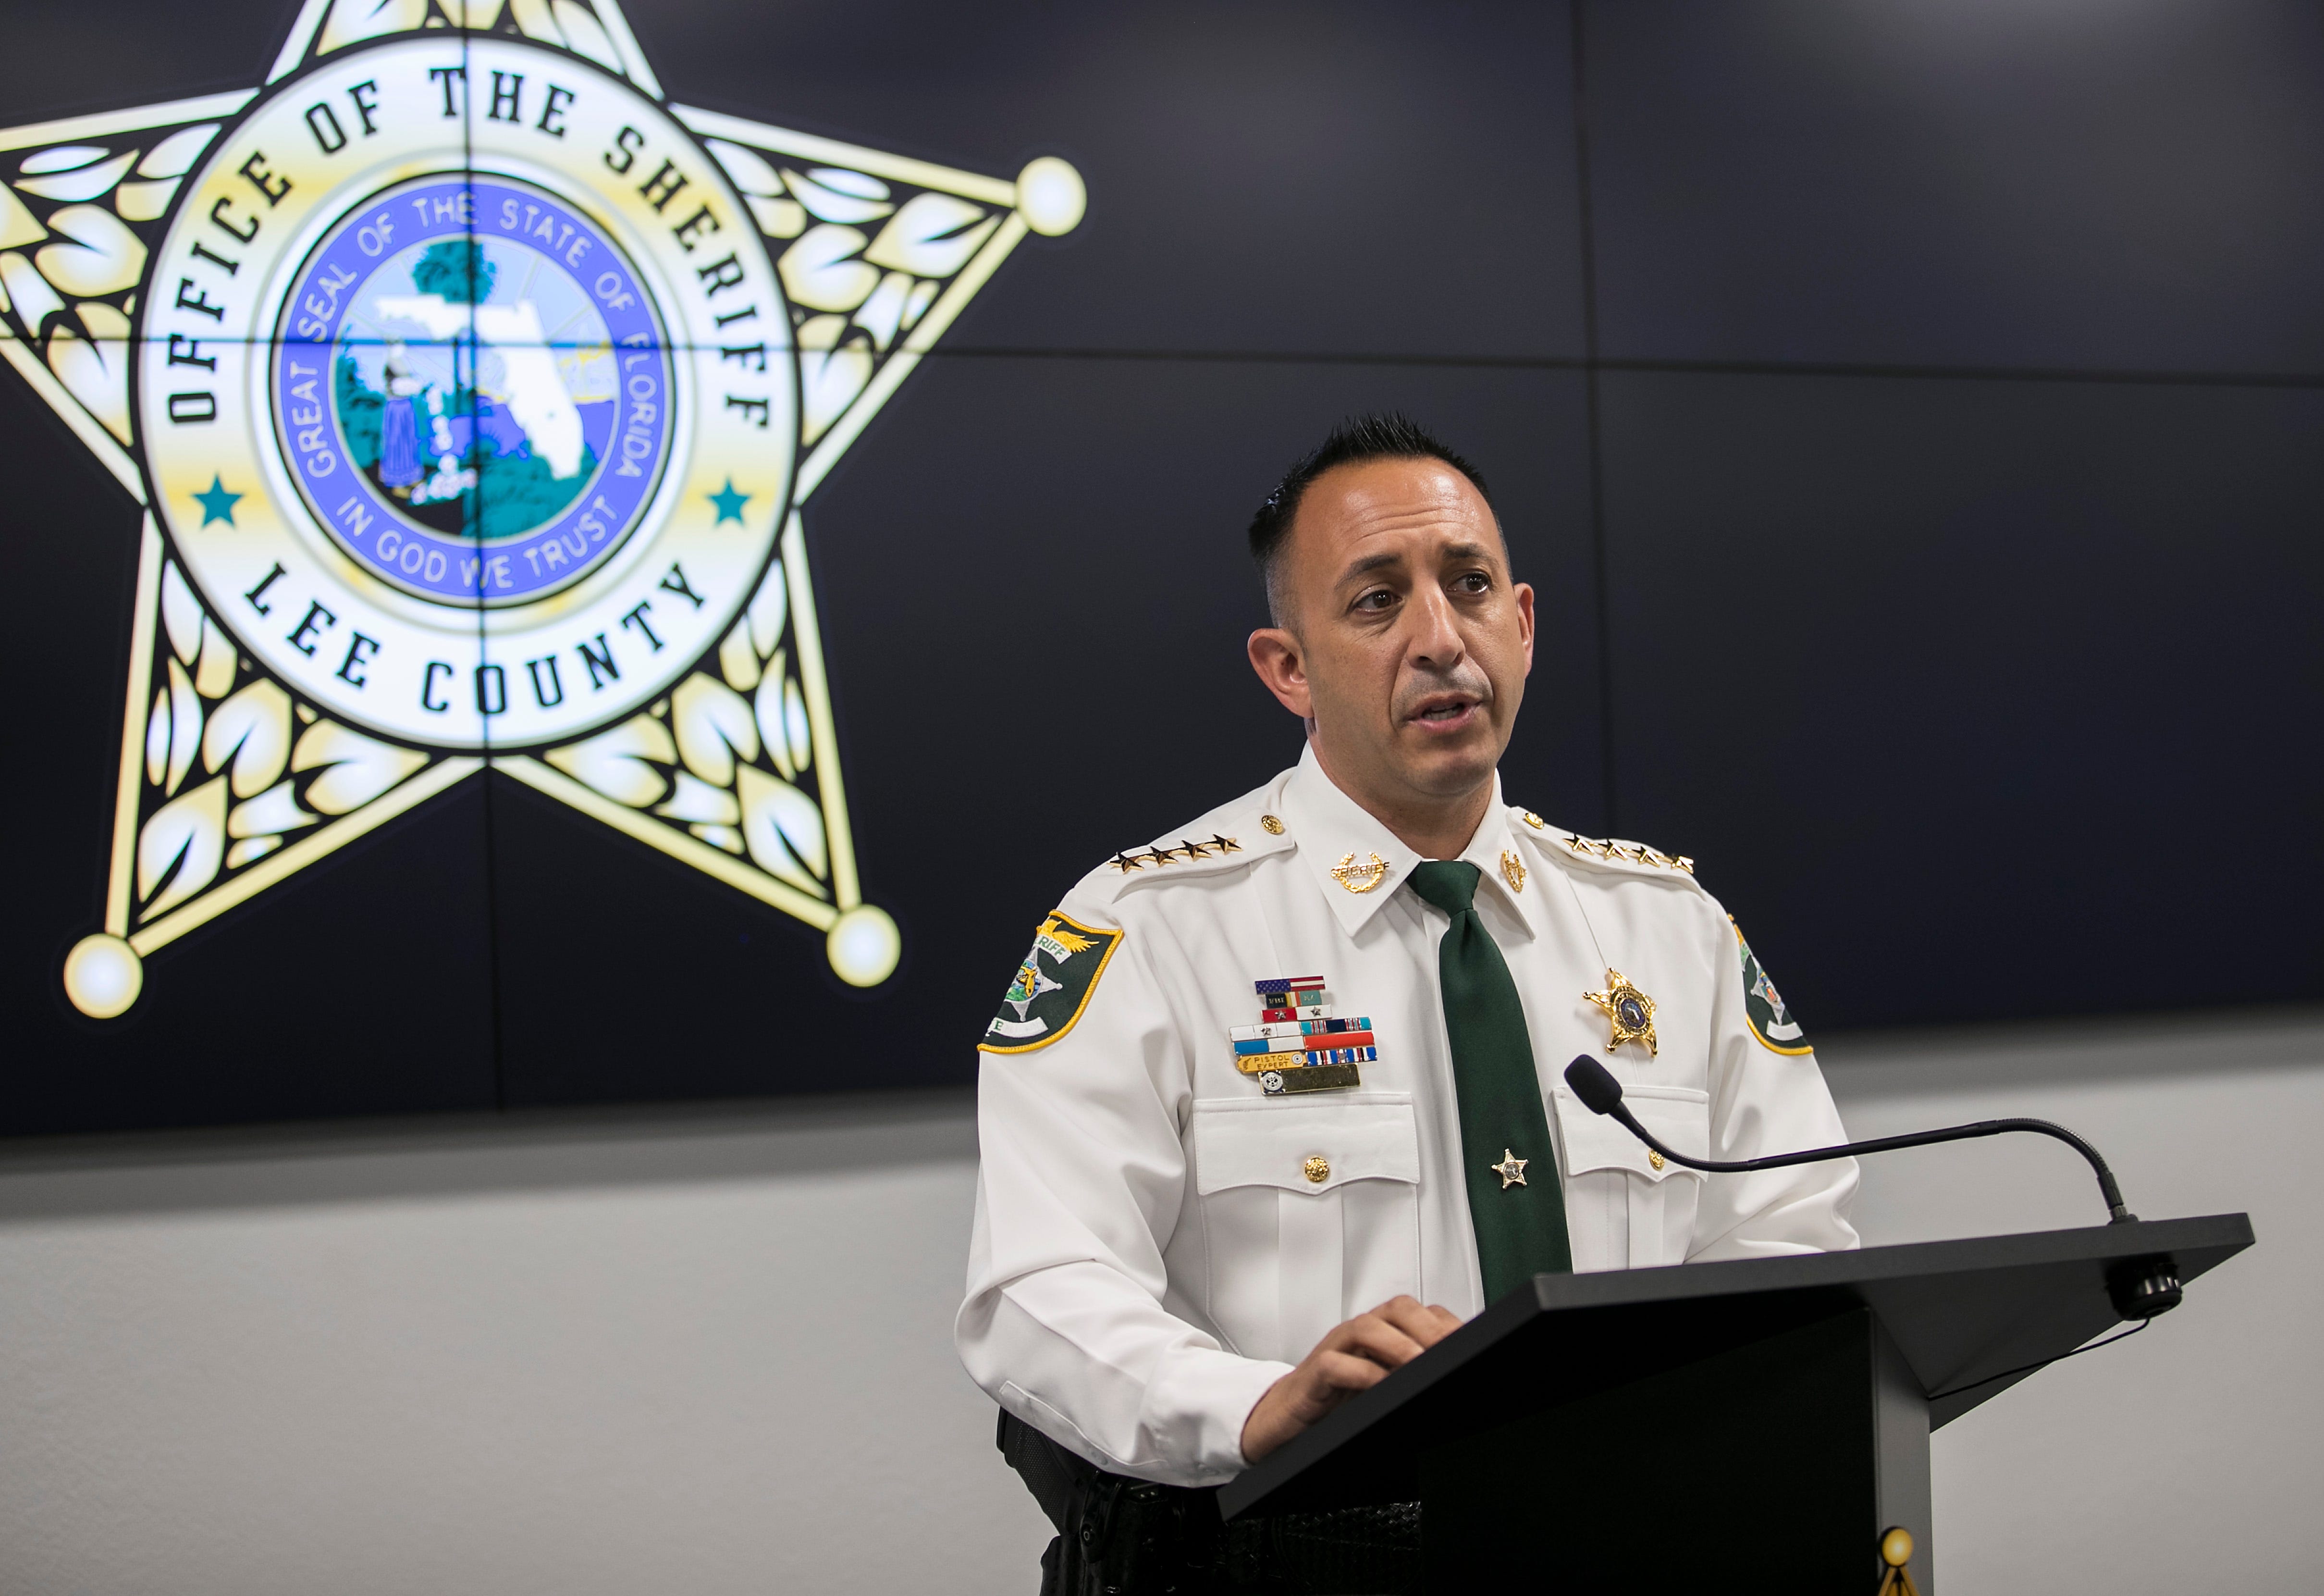 State ethics board: Complaint against Lee County sheriff has merit